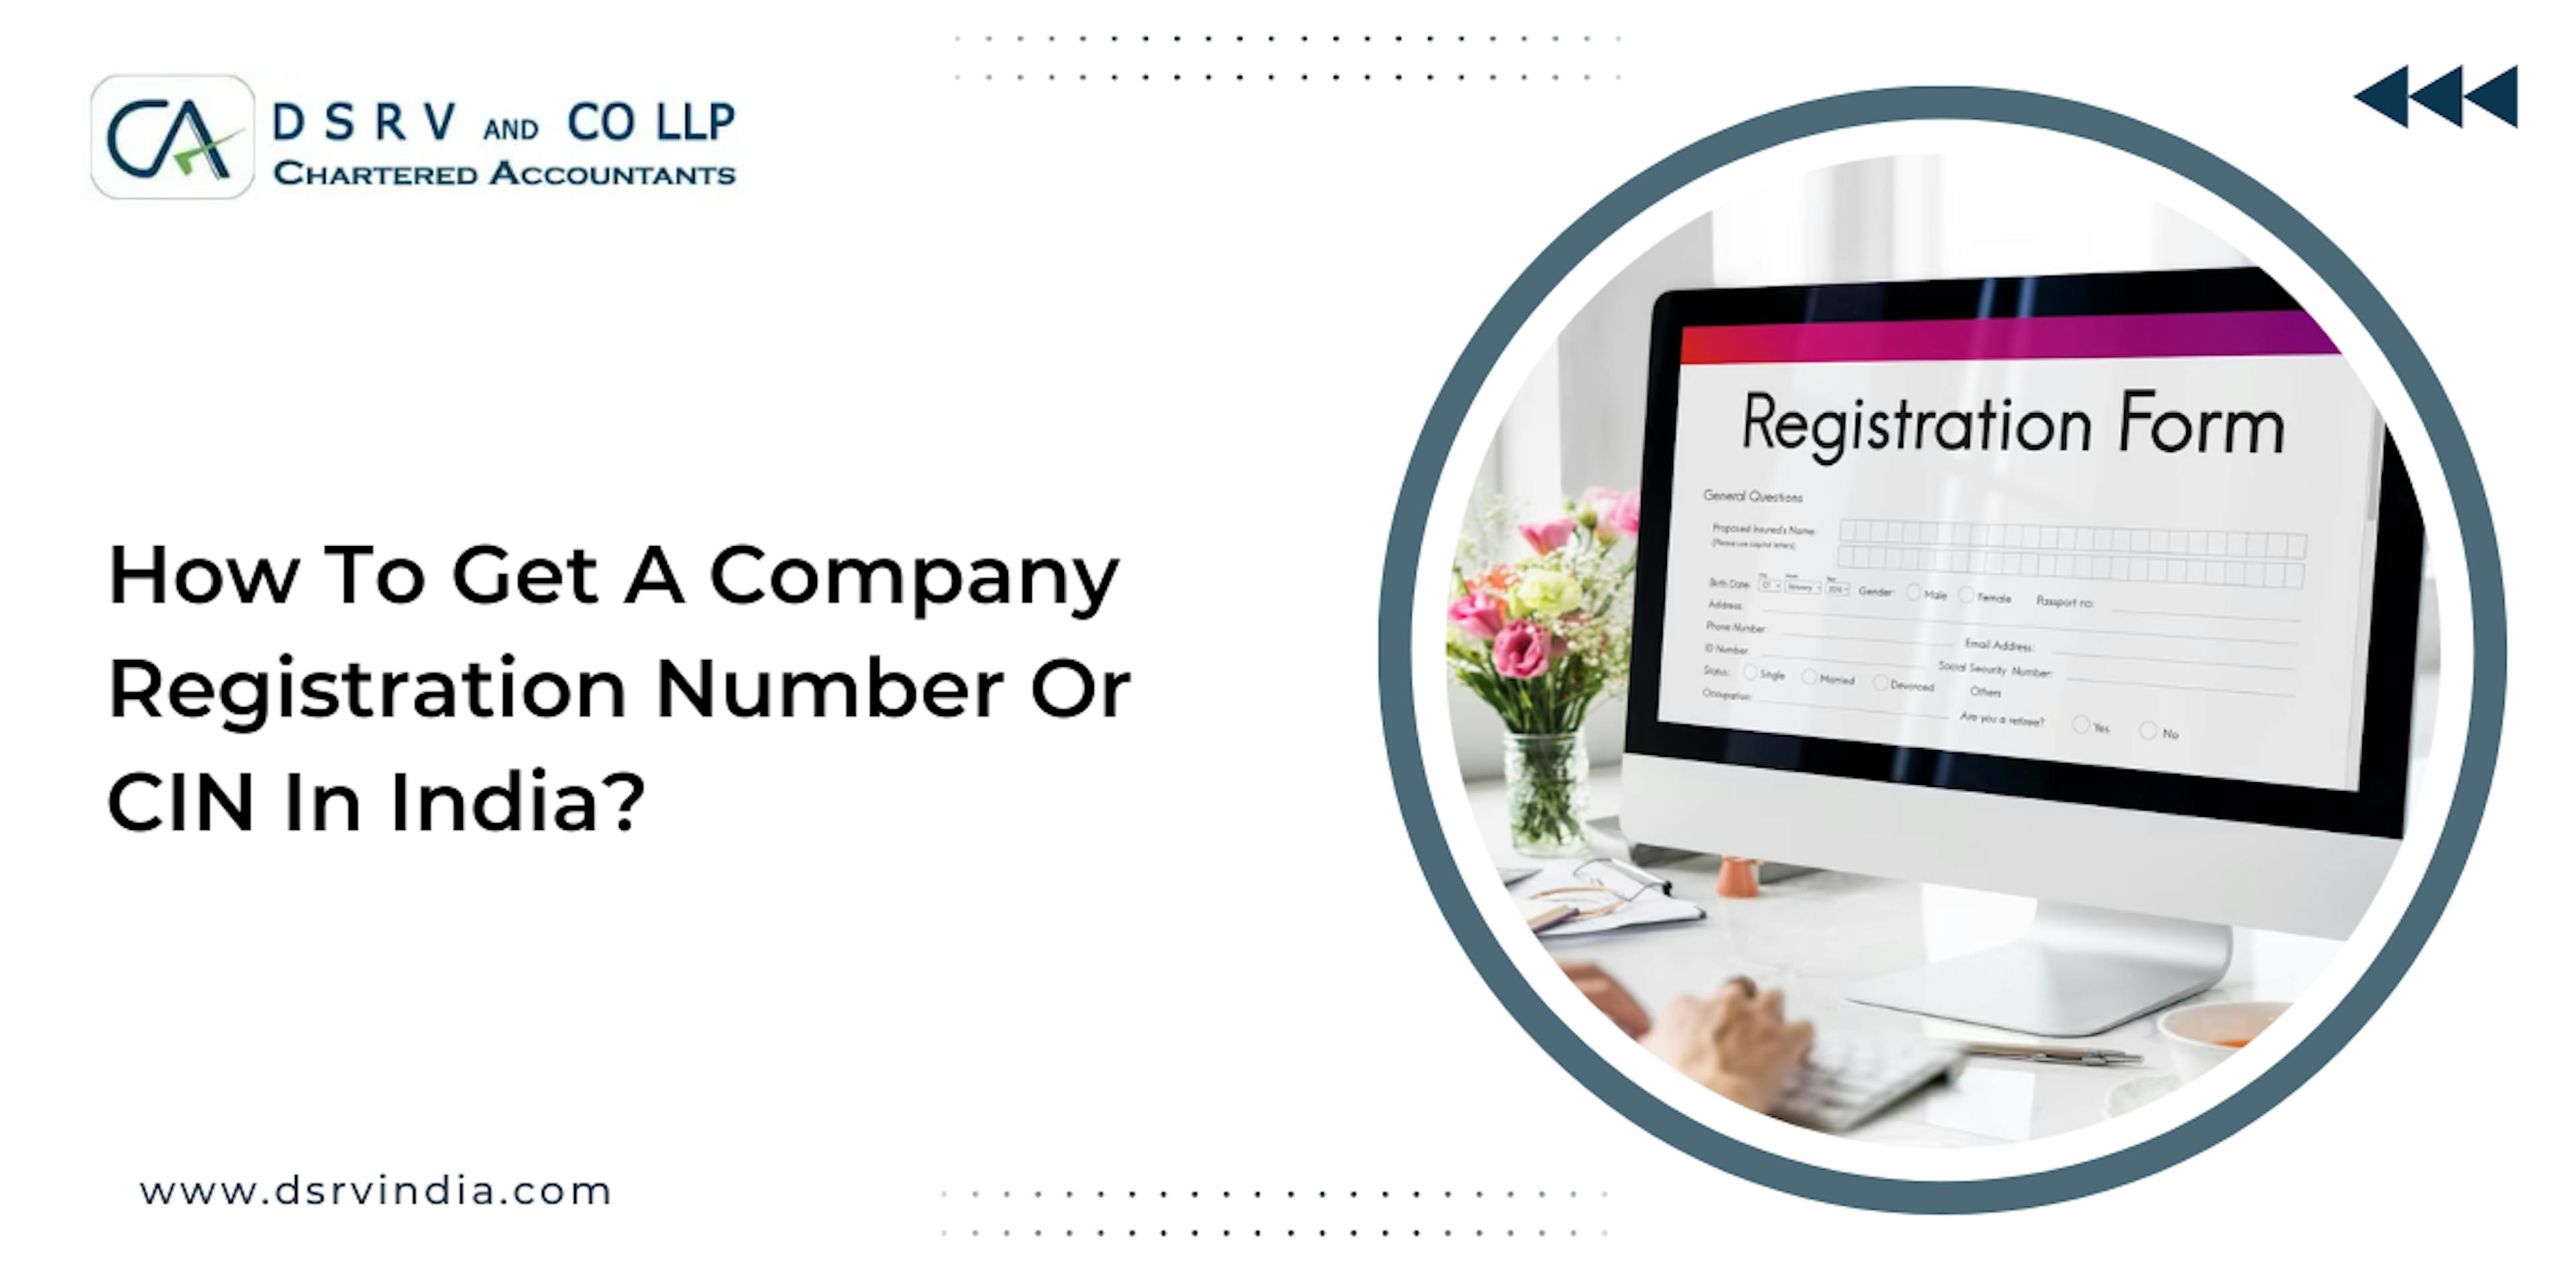 How To Get A Company Registration Number Or CIN In India?: Blog Poster